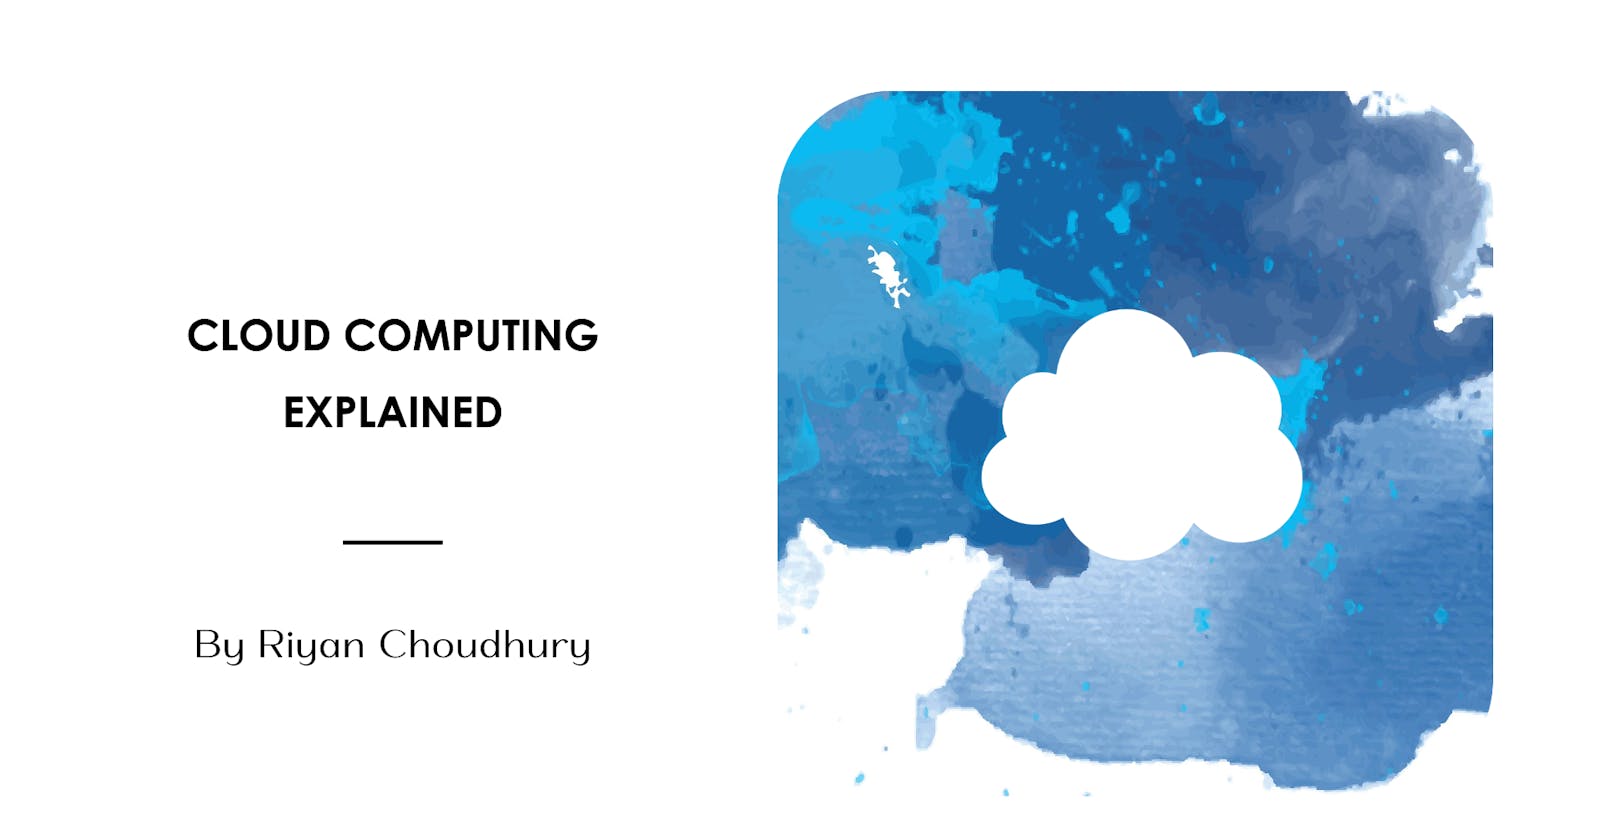 Common Cloud Computing Use Cases